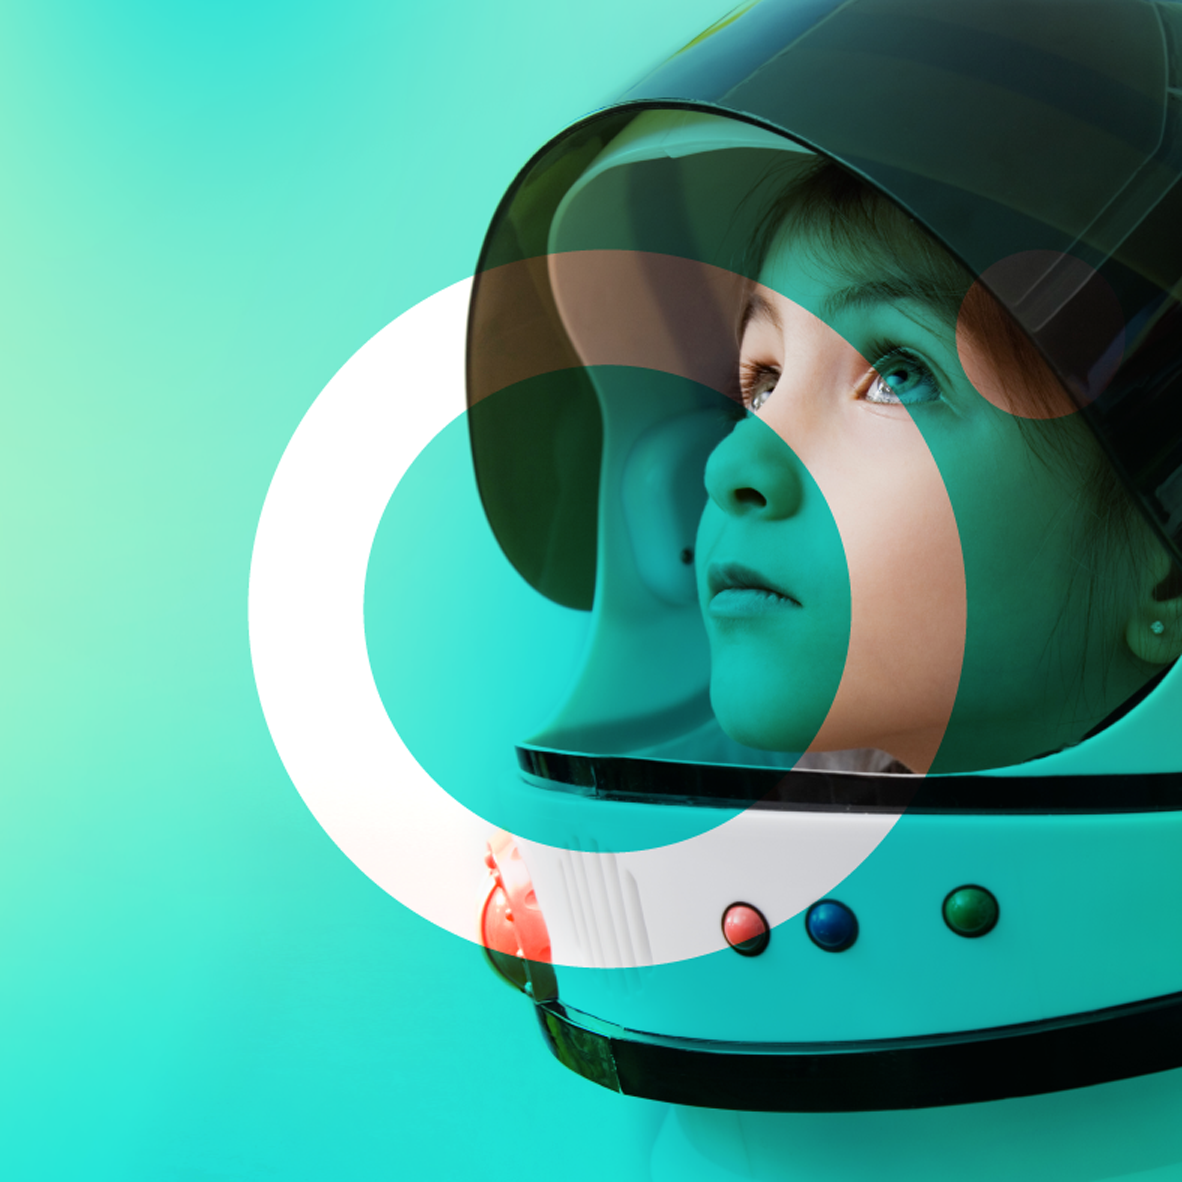 O'Reilly rebrand with child in astronaut helmet